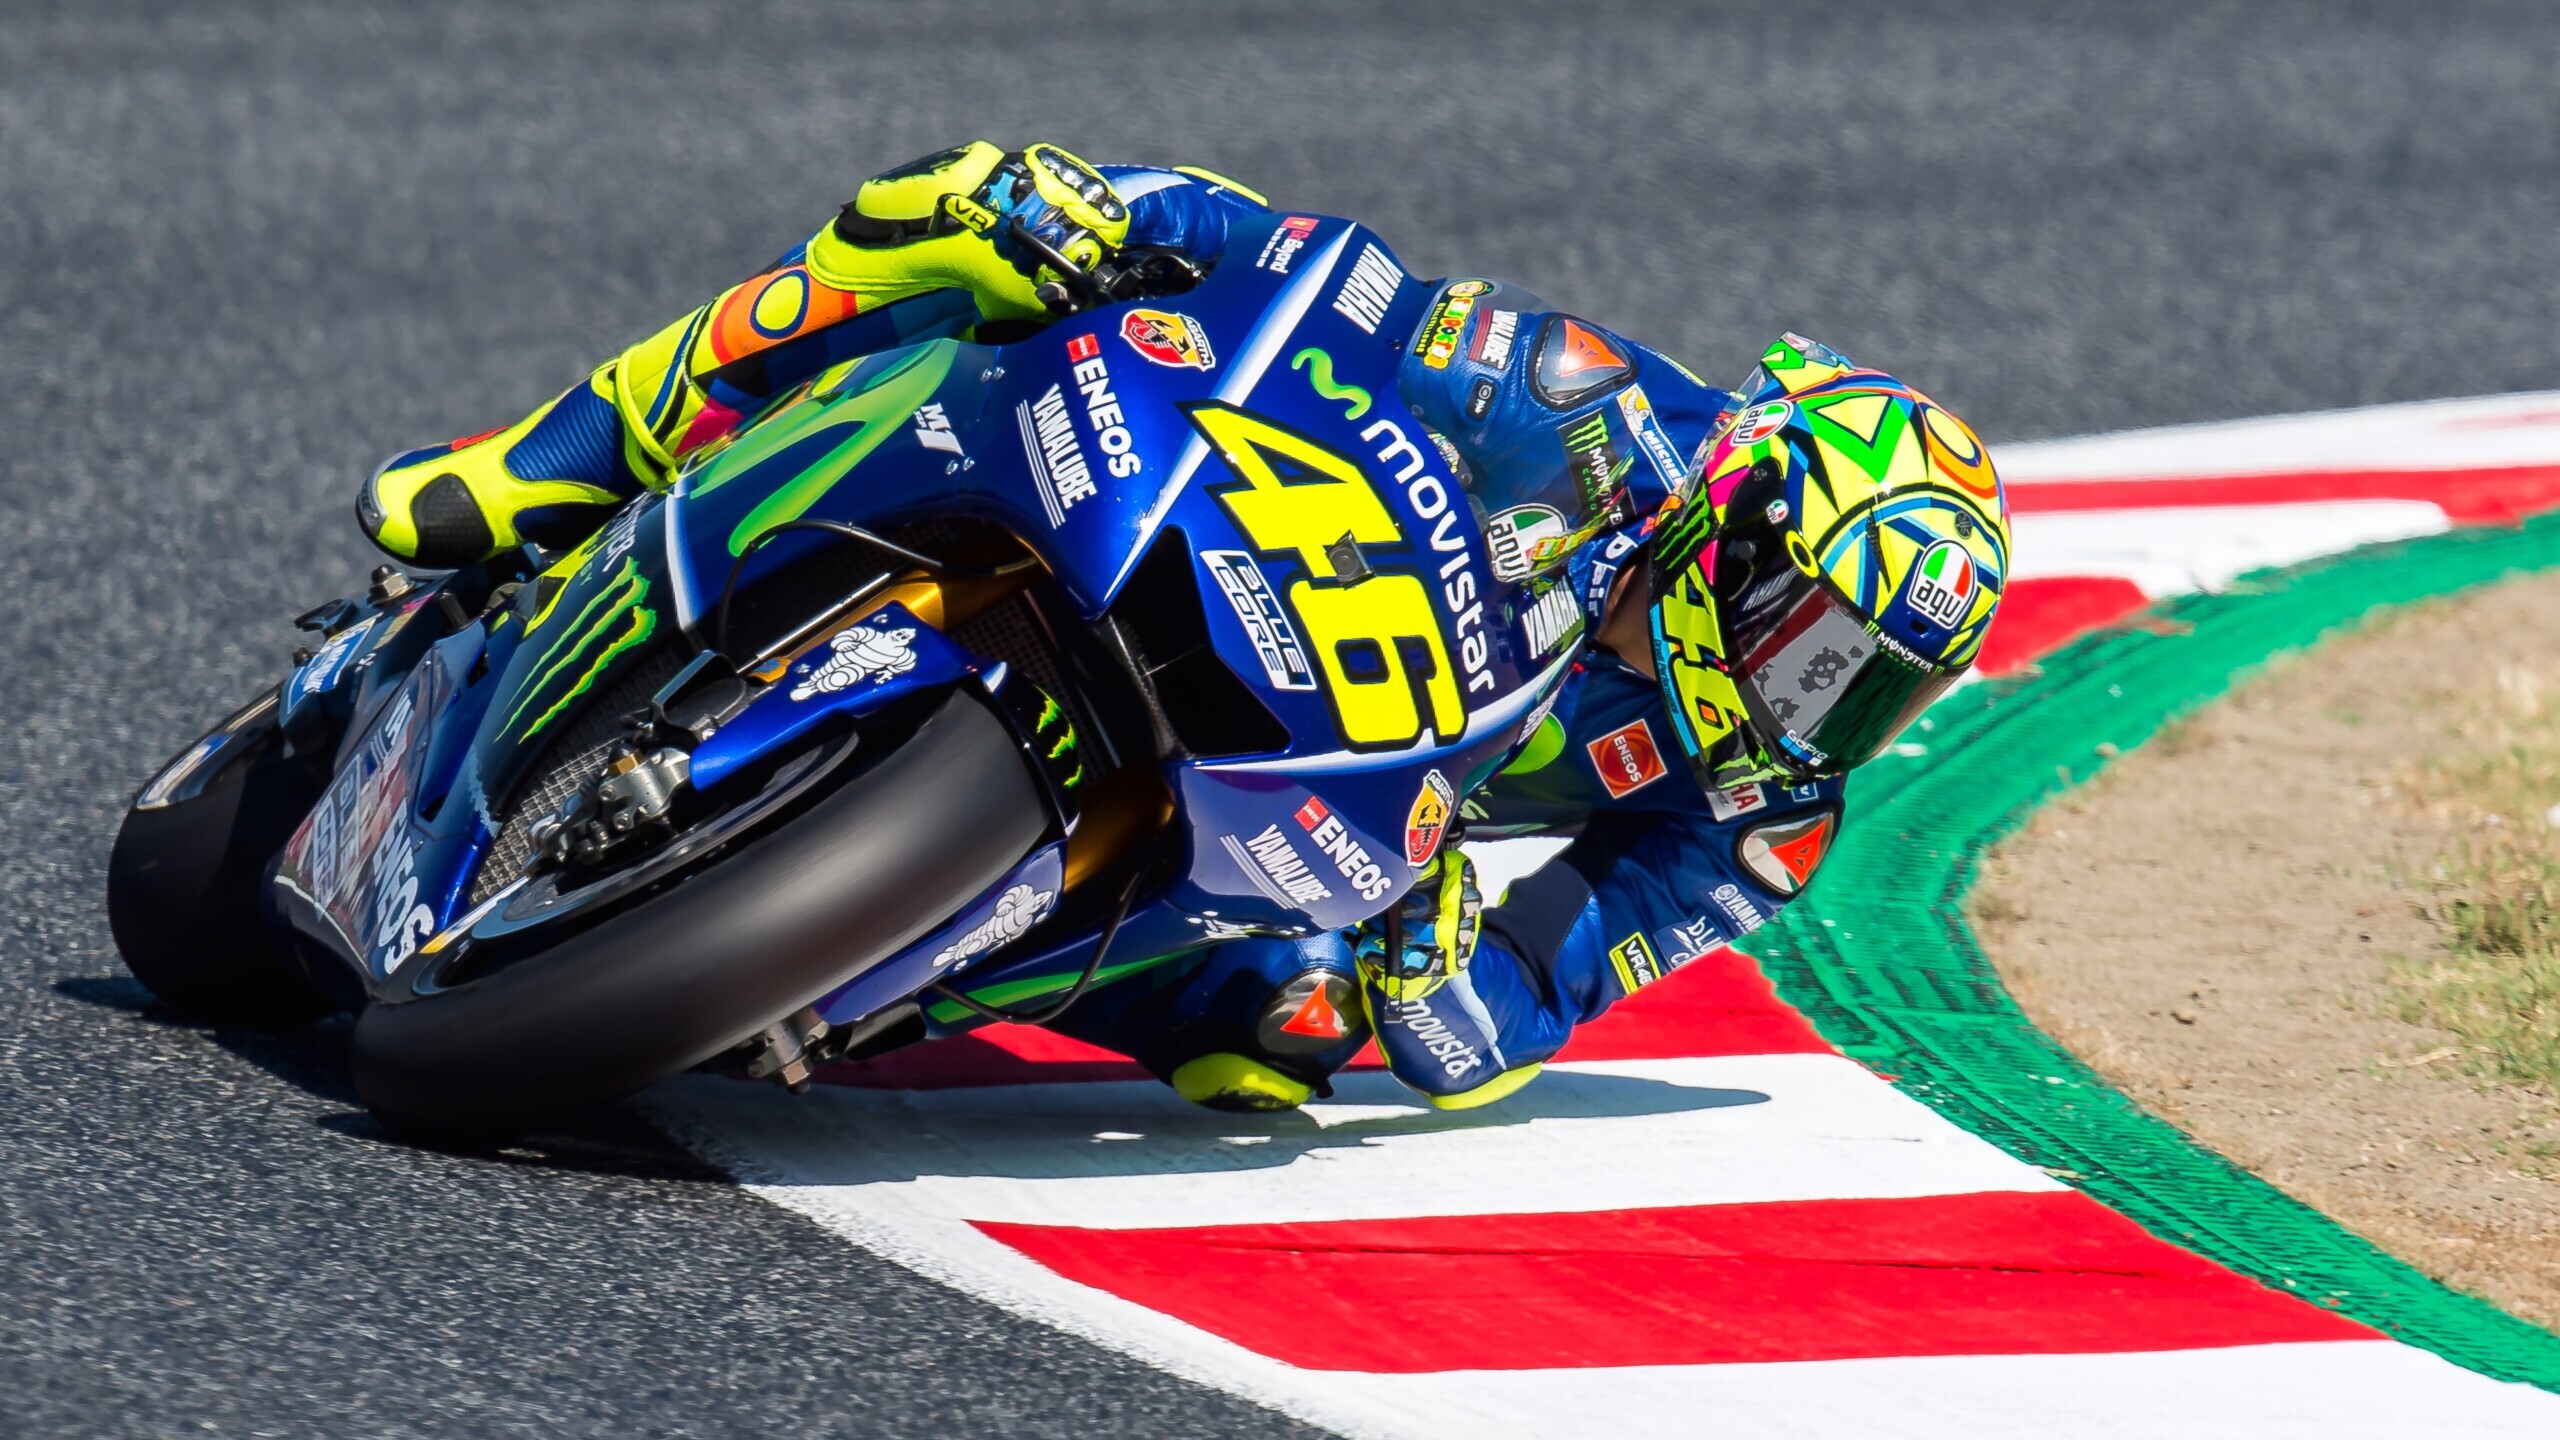 How to Watch MotoGP 2021 Without Cable Live Stream Grand Prix Races